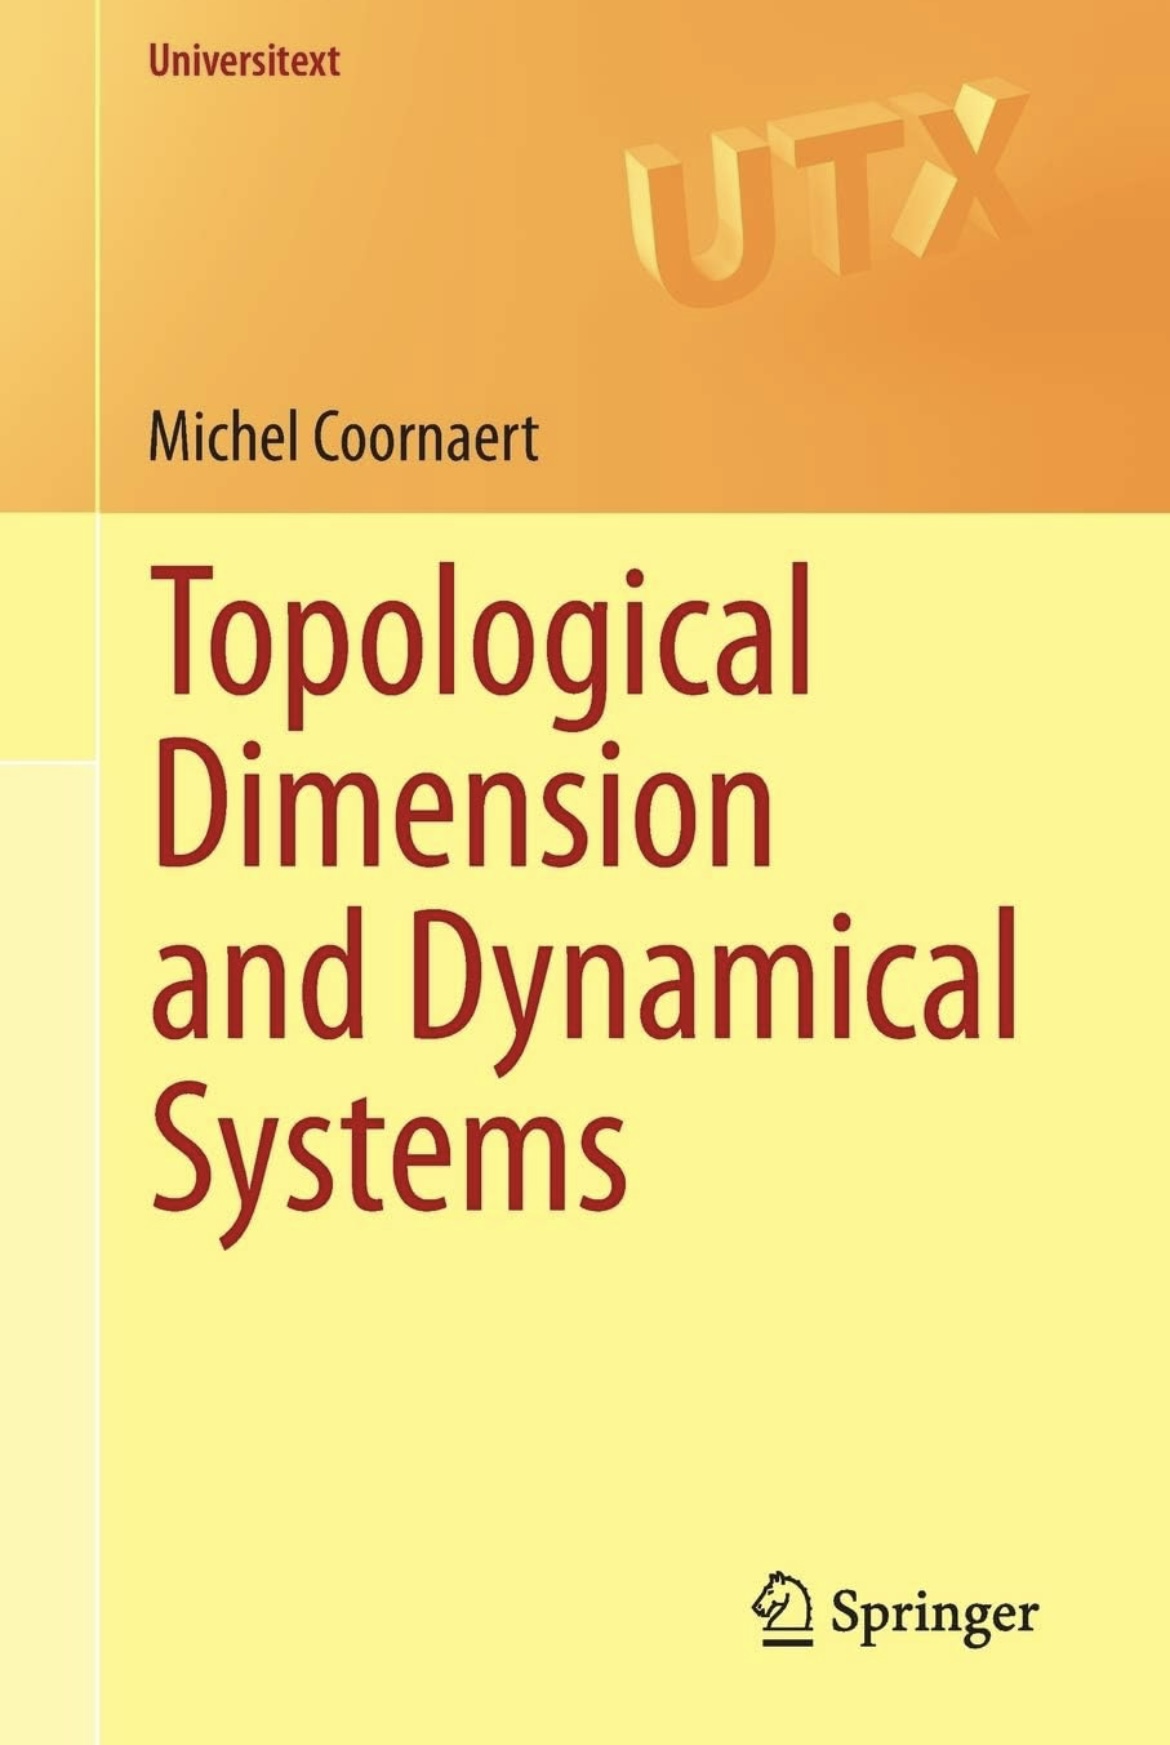 Photo du livre  Topological Dimension and Dynamical Systems